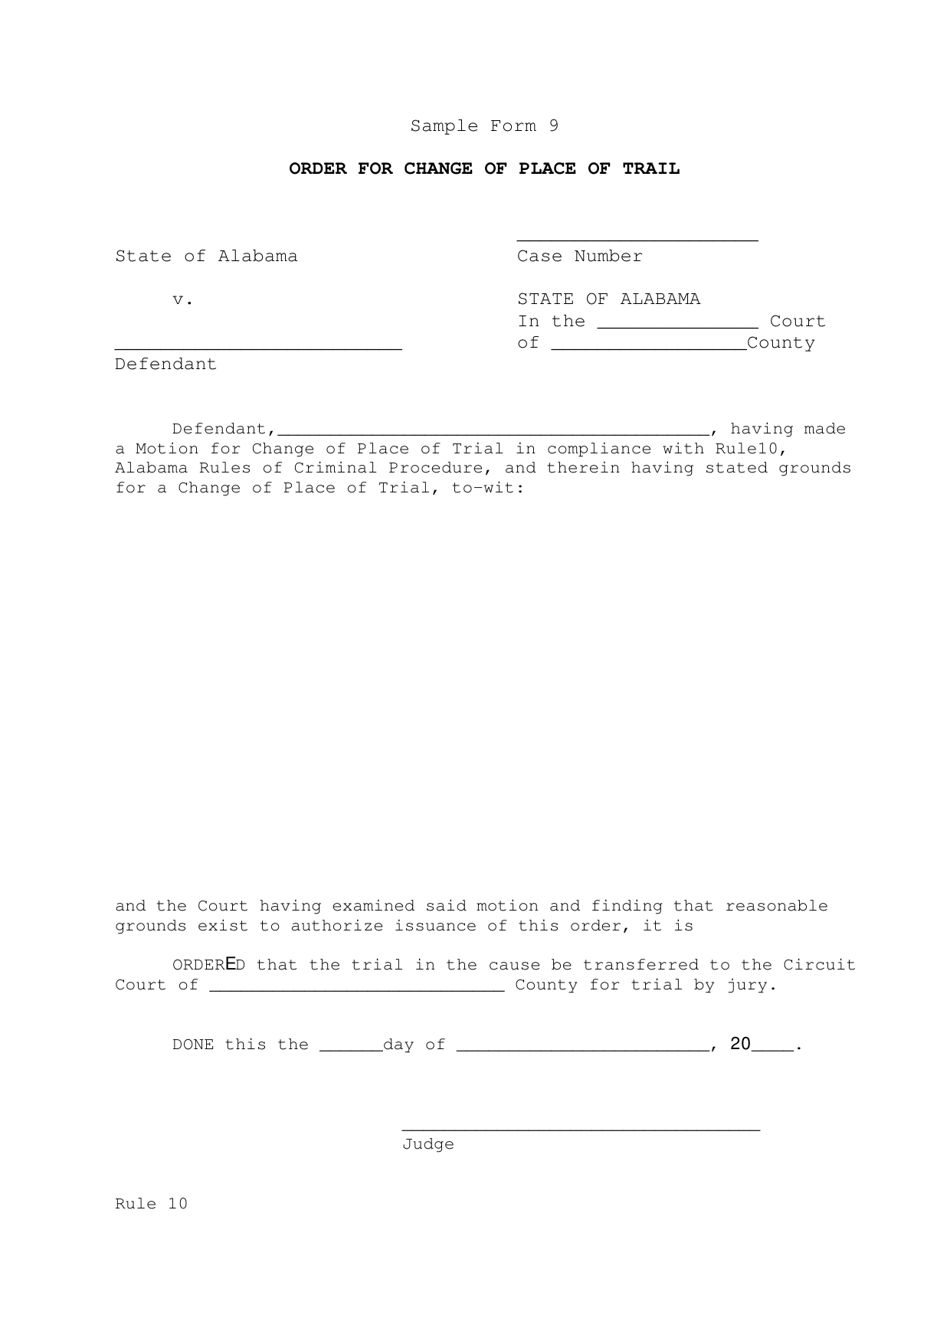 Sample Form 9 Order for Change of Place of Trail - Alabama, Page 1